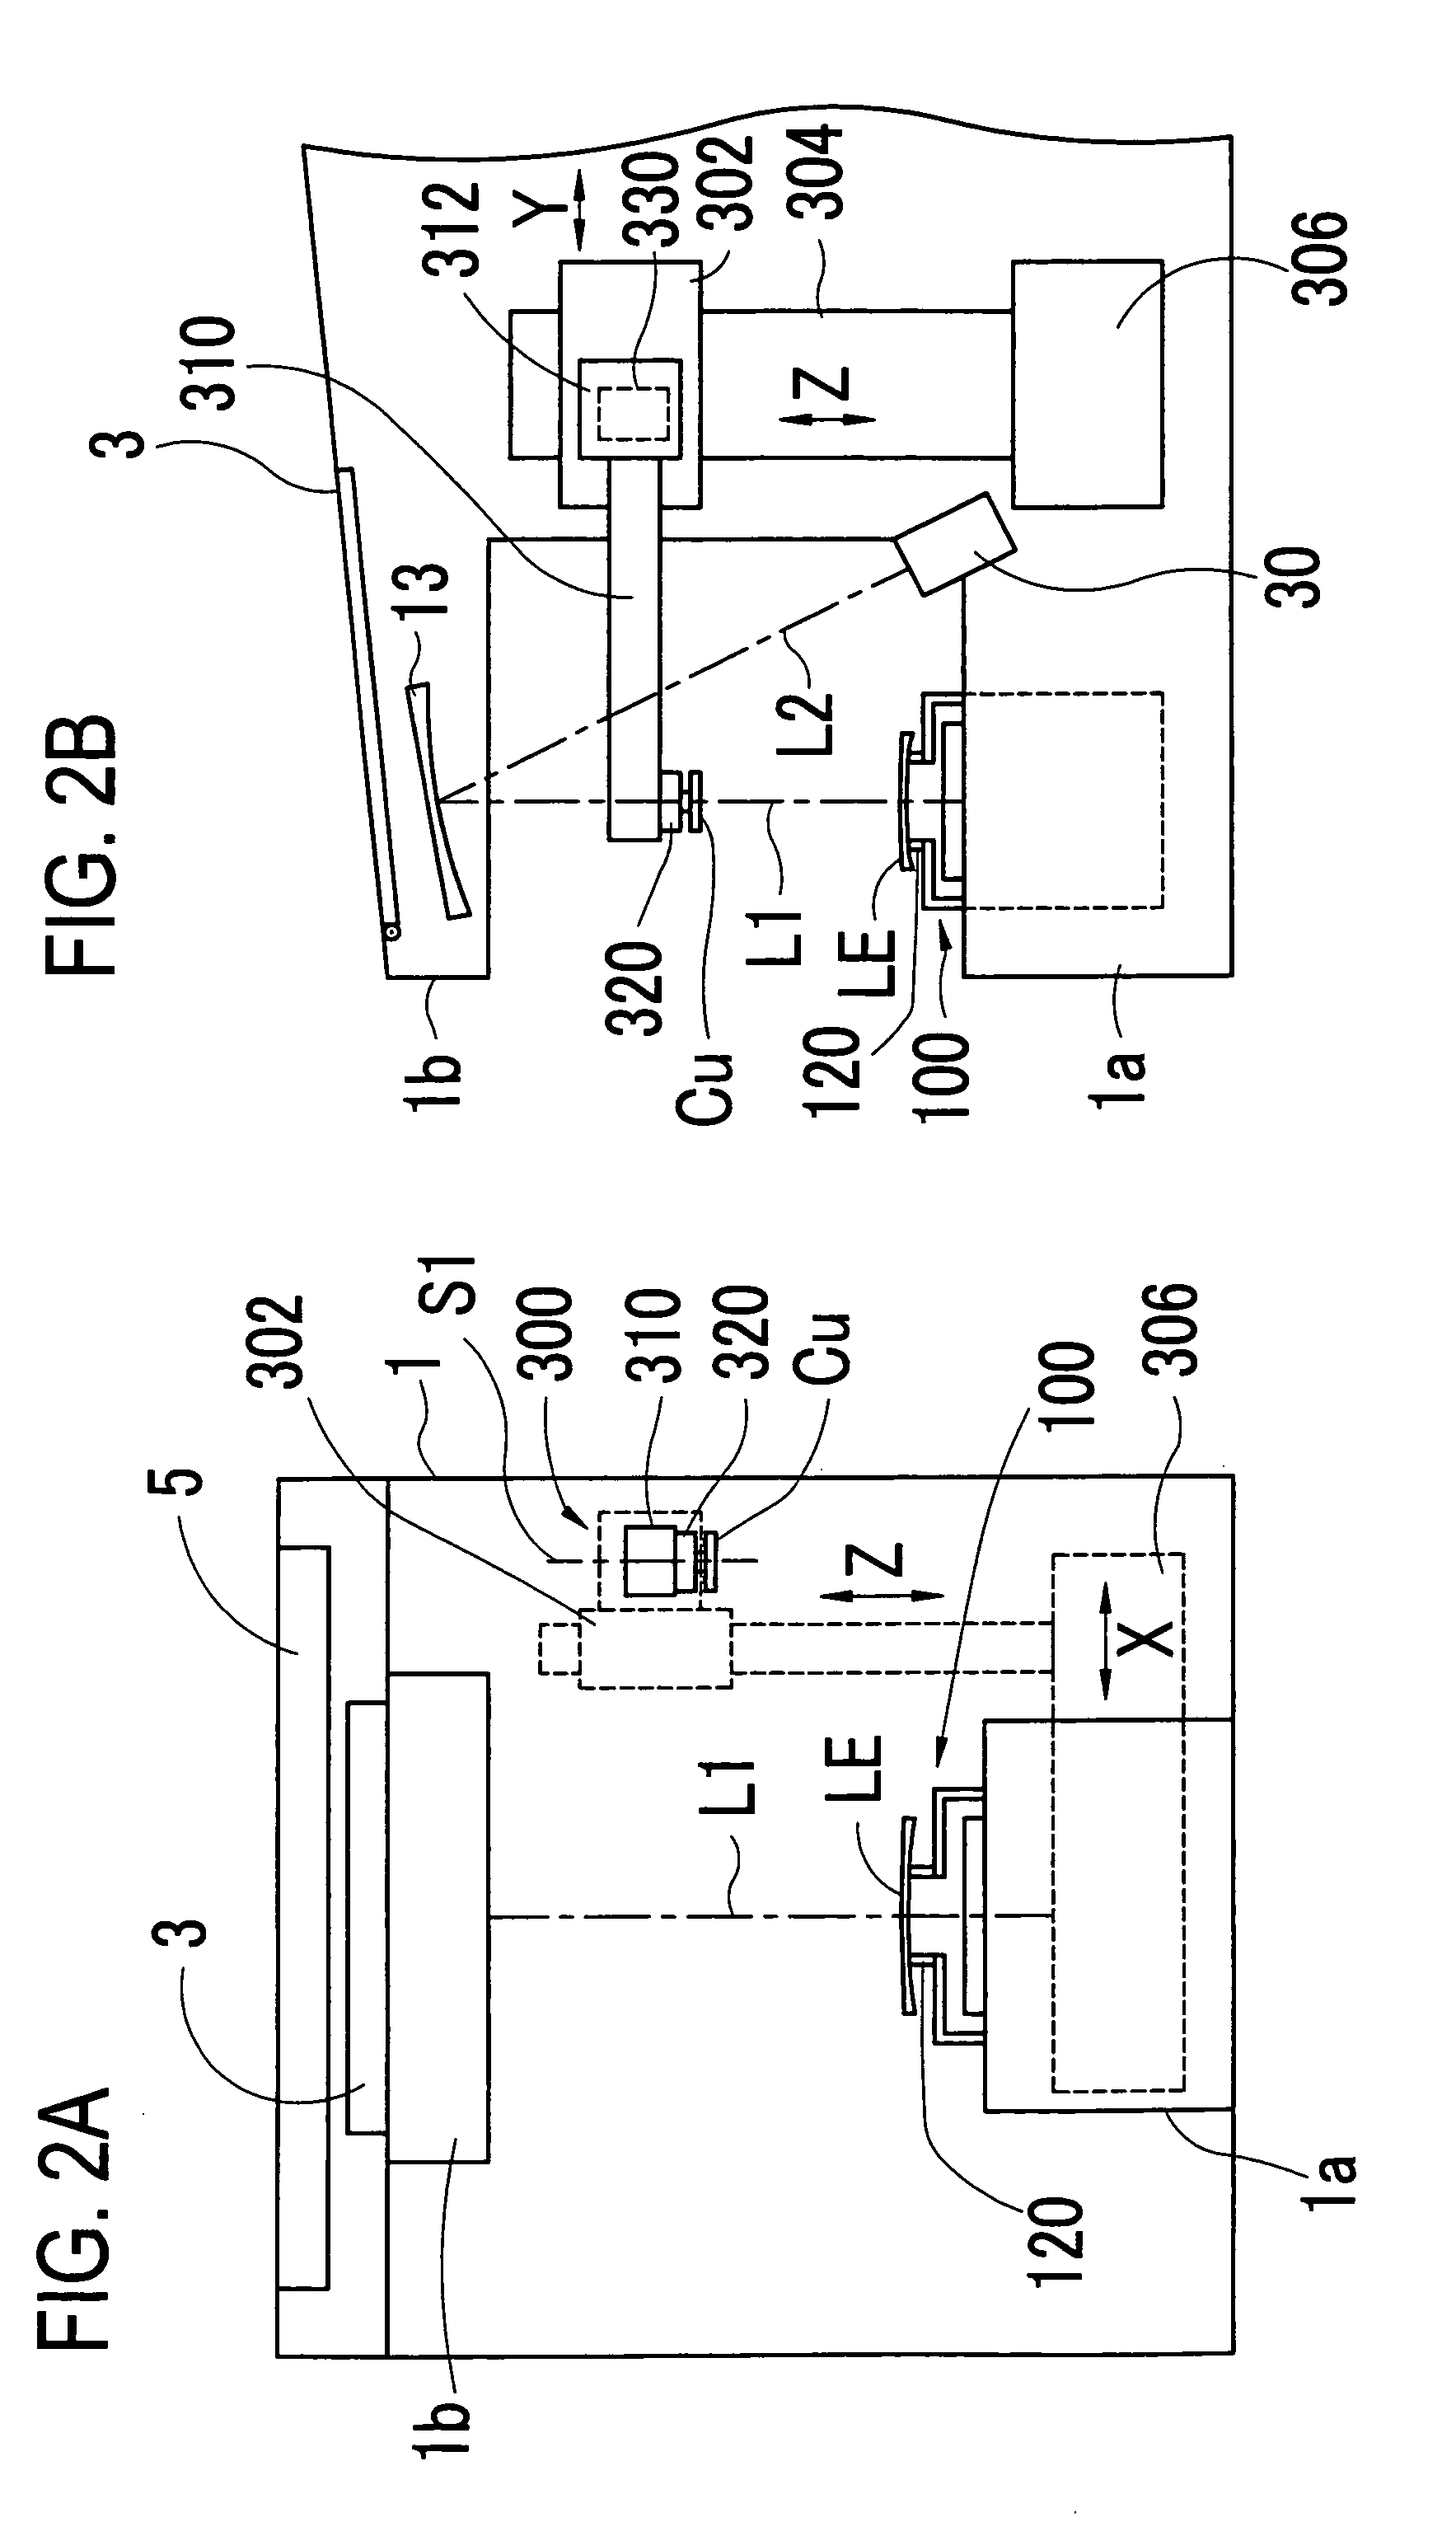 Cup attaching apparatus